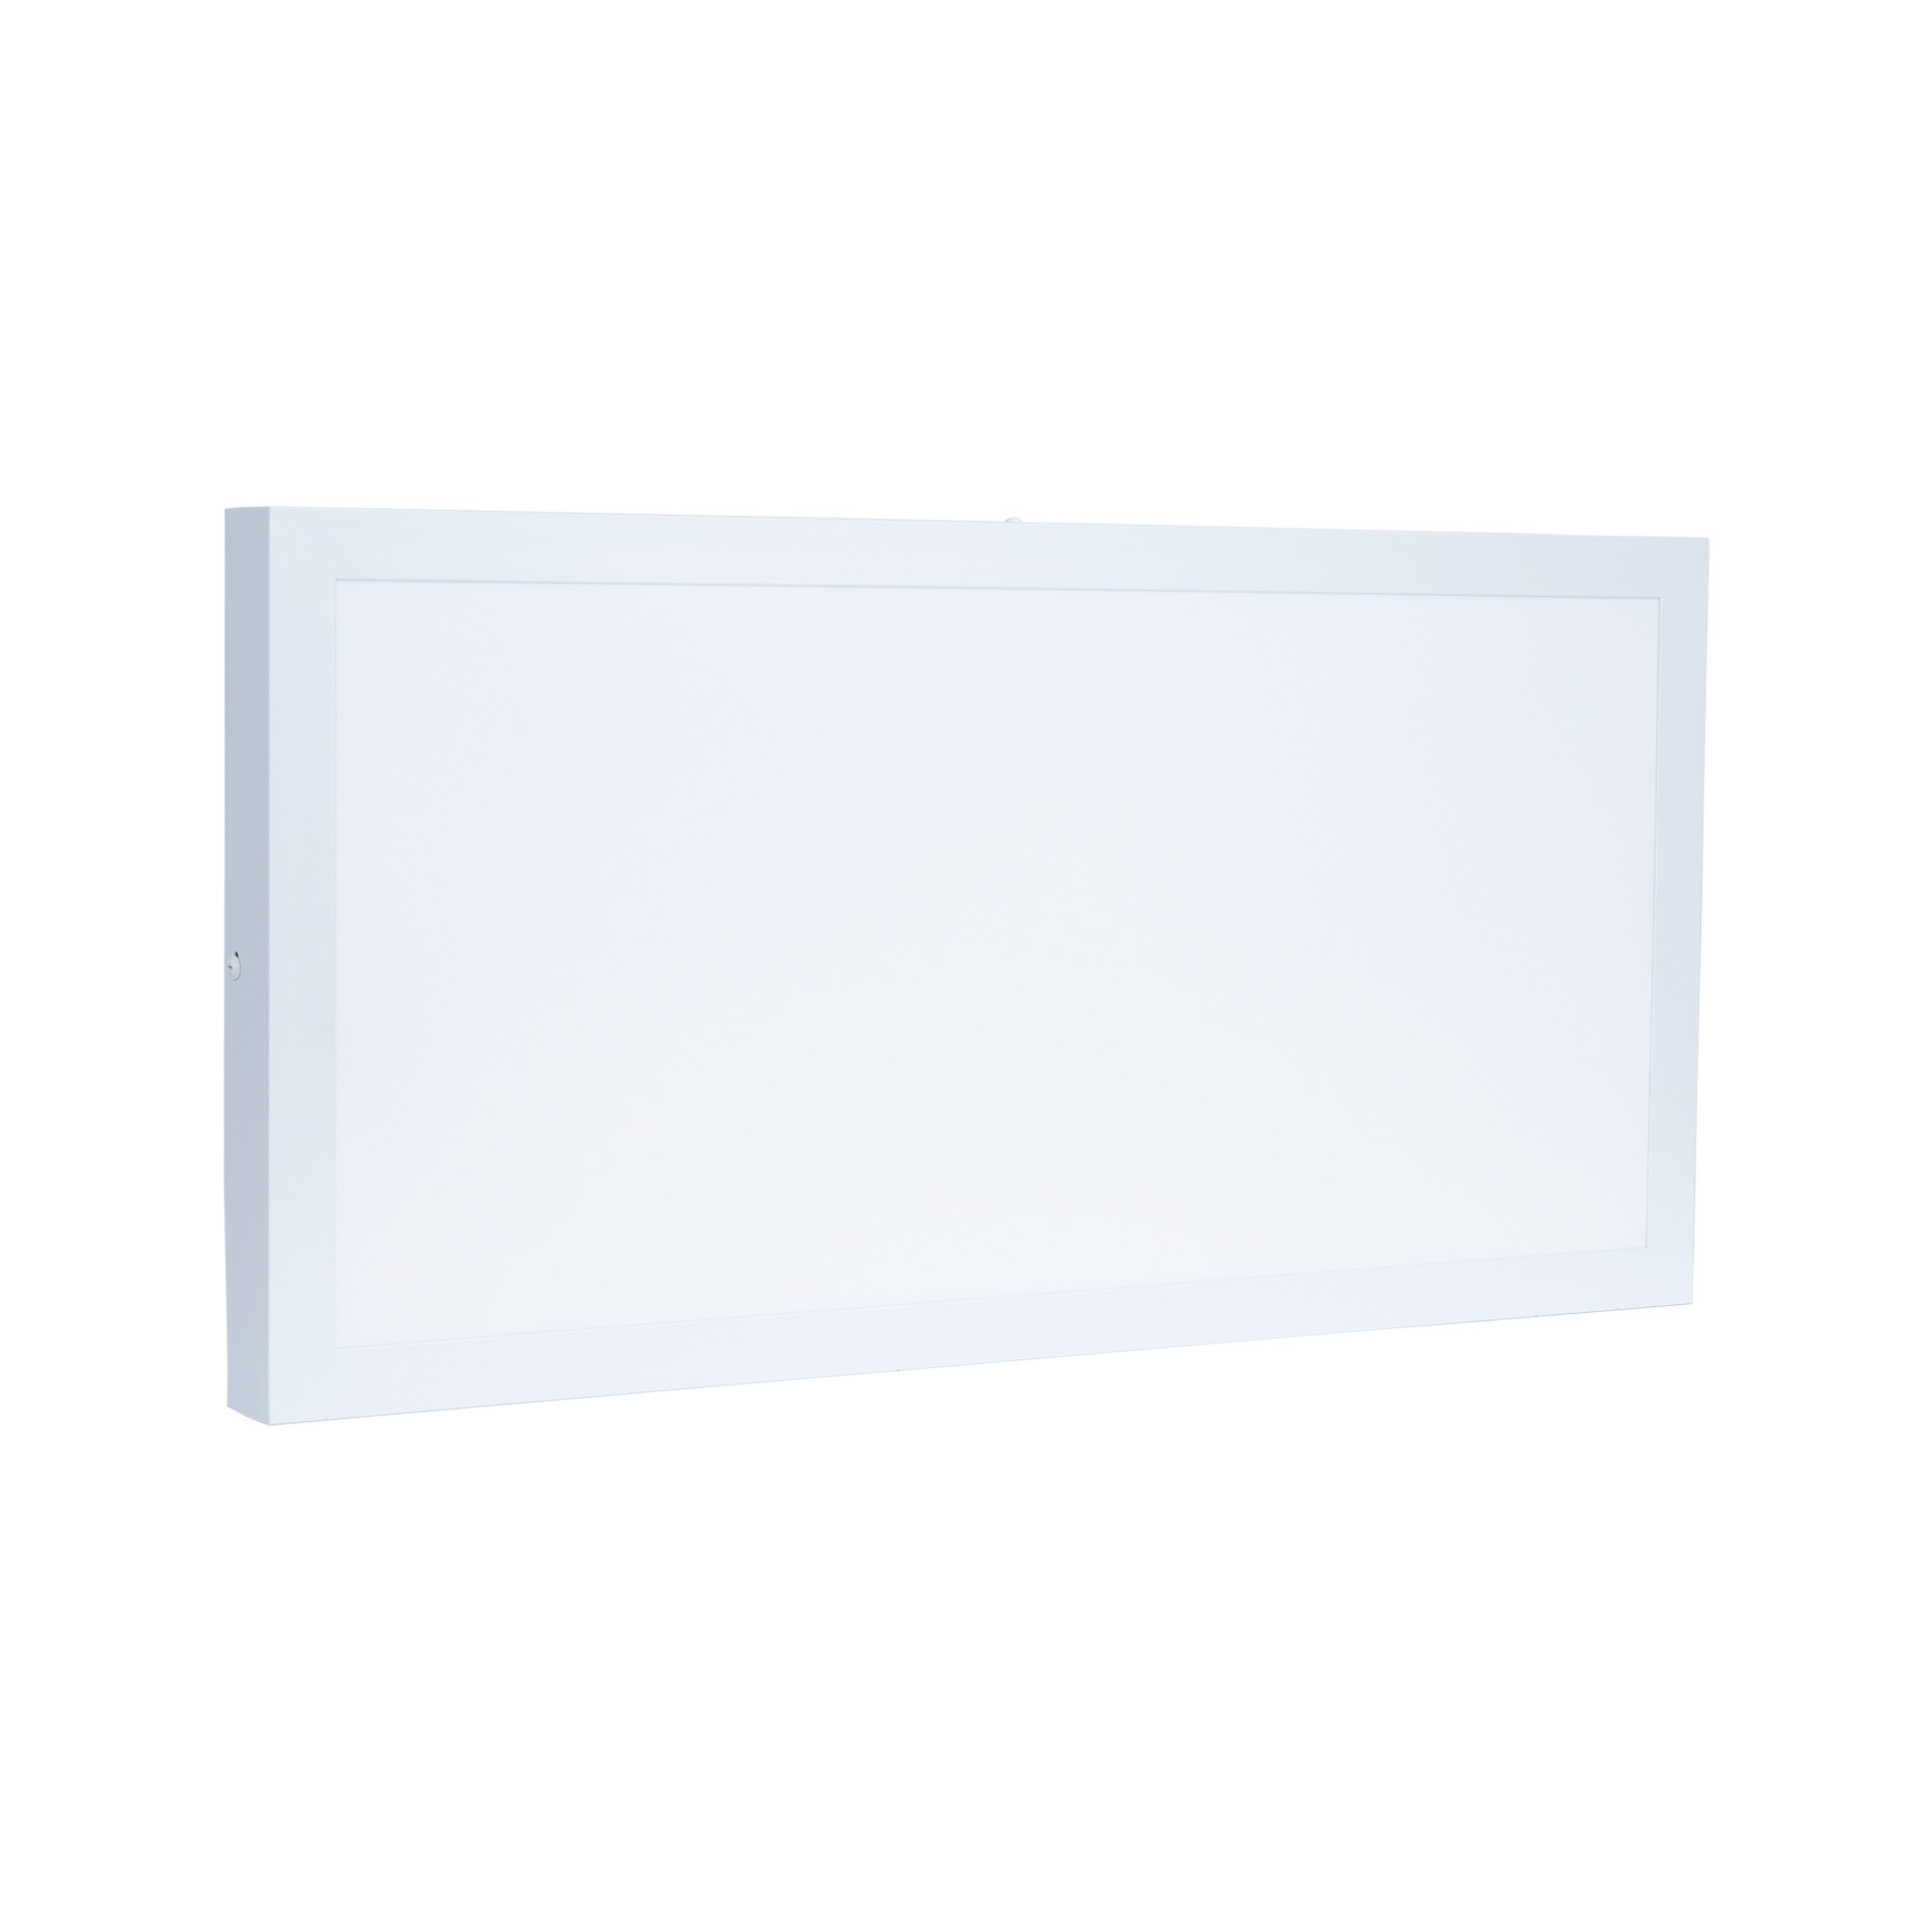 Marco Superficie Panel LED 60 x 60. Marco Blanco.